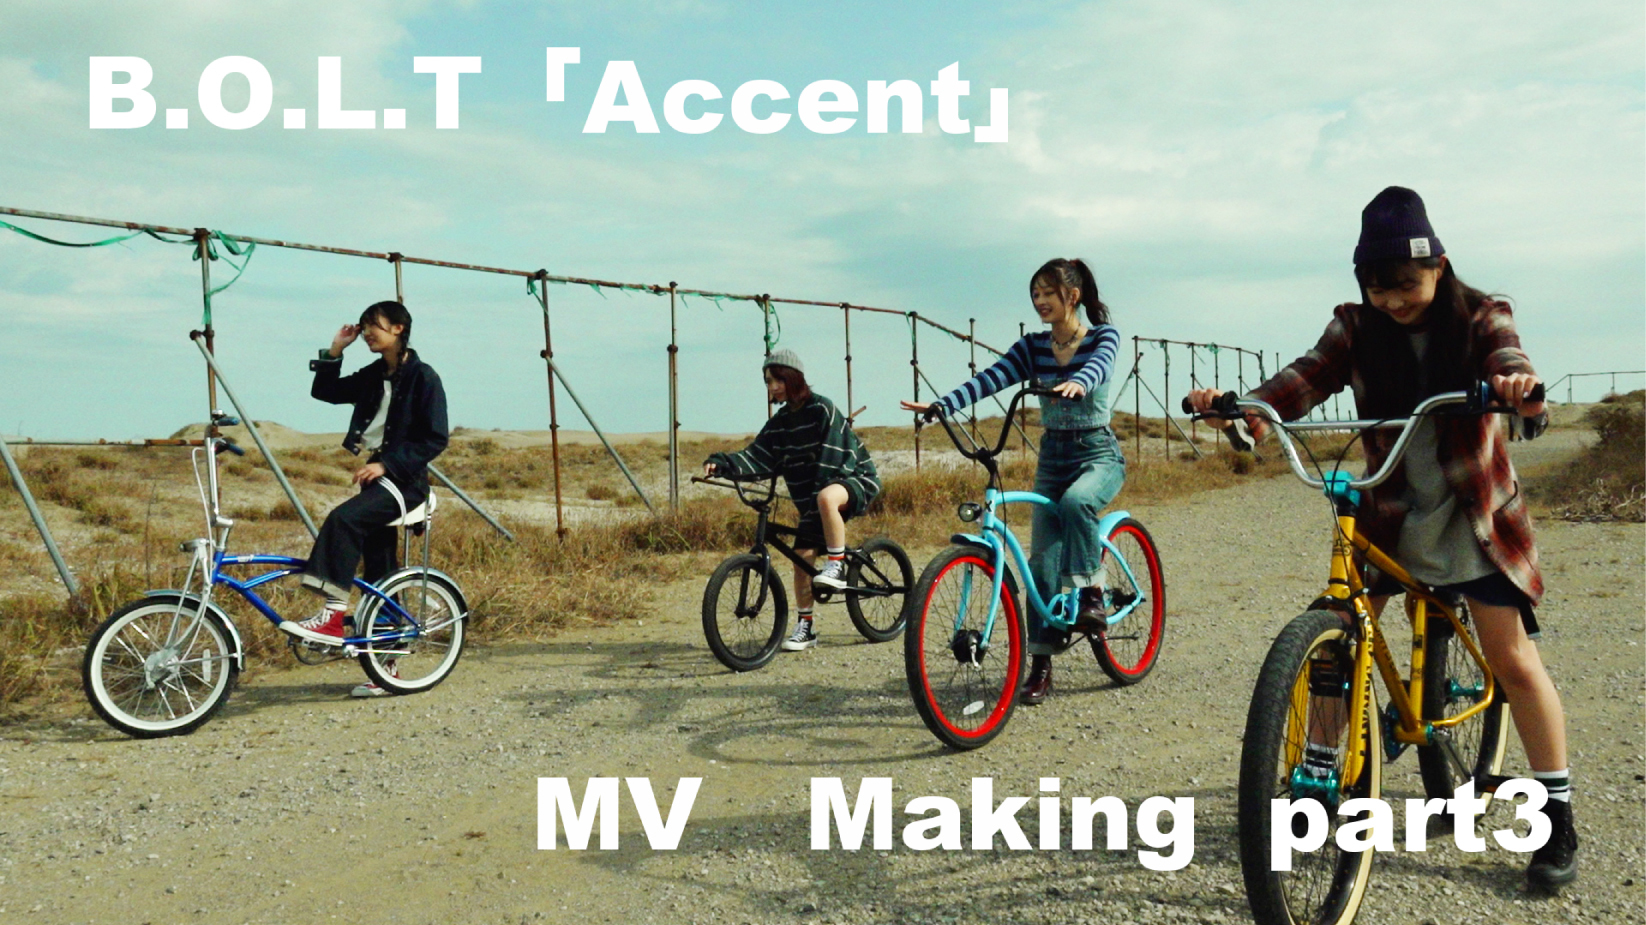 「Accent」MV Making Part3サムネイル